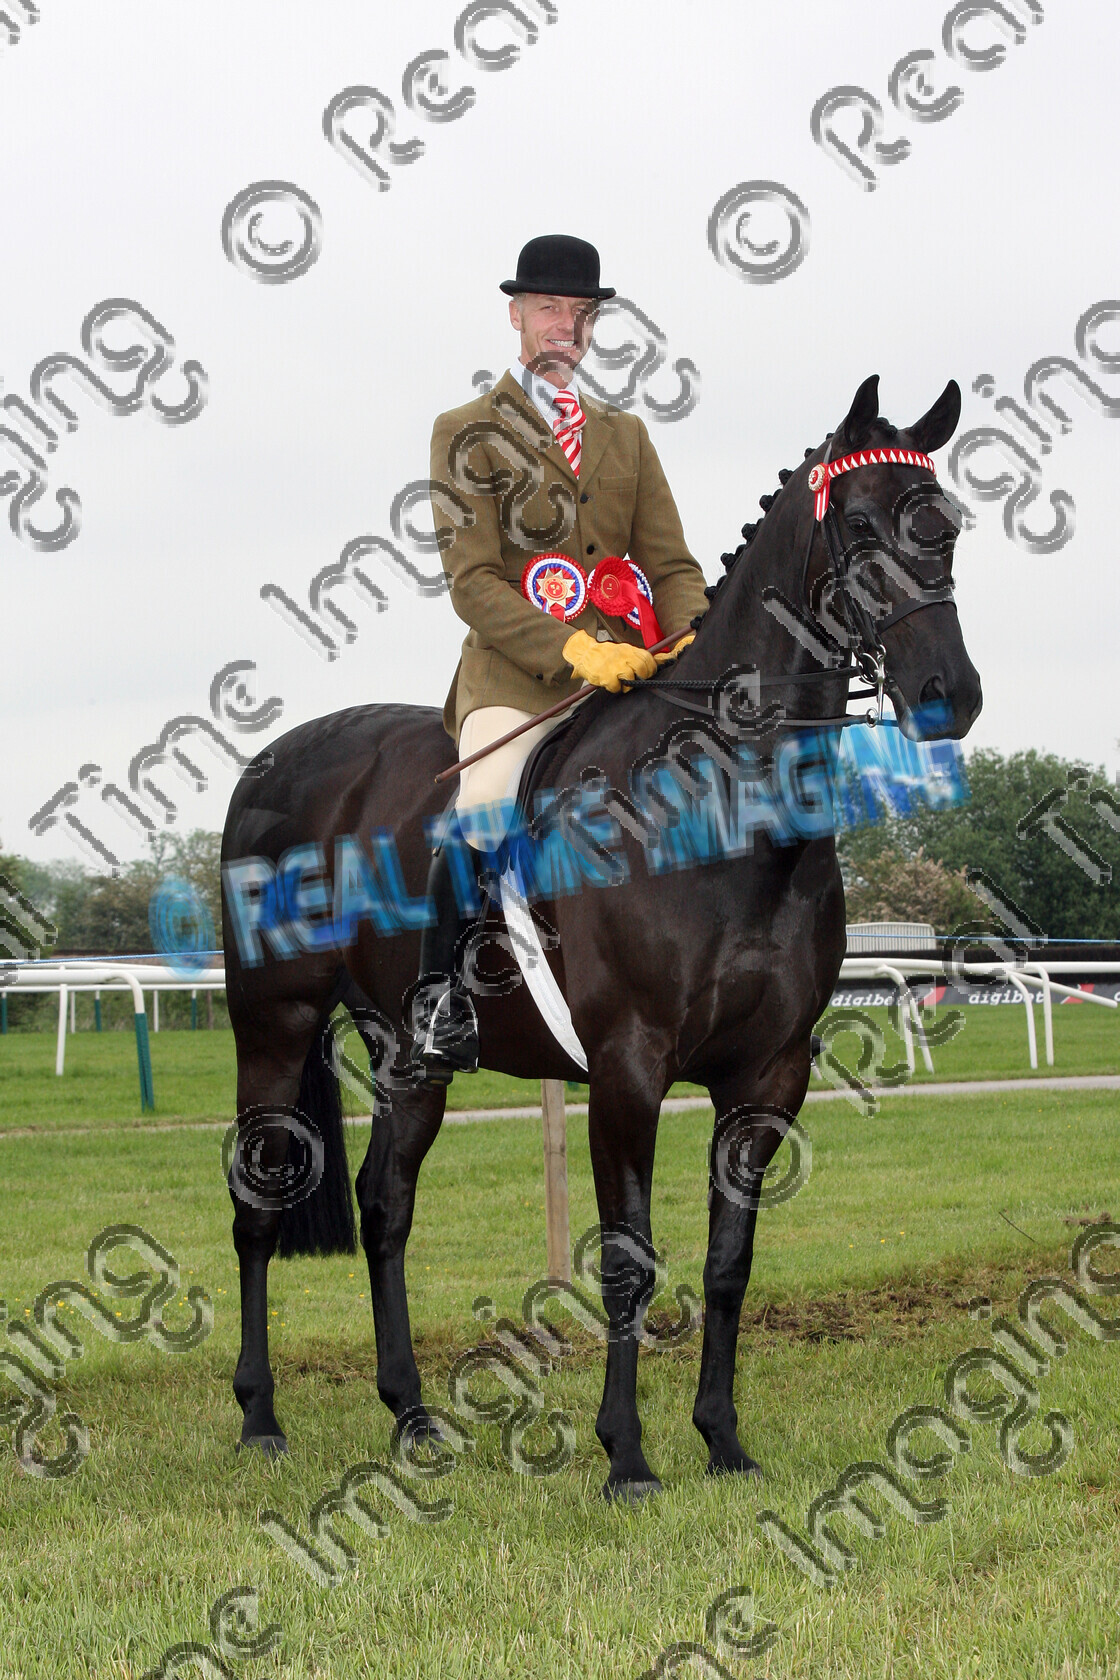 S08-22-04-004 
 Keywords: Midland Counties Show, Uttoxeter Racecourse, UK, Sunday, 1 June, 2008, upright portrait, 295, Ridden, Grand Prix, Championship, 1st first, Champion, winner win won, DERWENT SHADOW PLAY, `Owner: , McCulloch, Miss L, `Rider: , Richard Telford, black, brown, Gelding, large, brow band, Rosette, stand, presentation